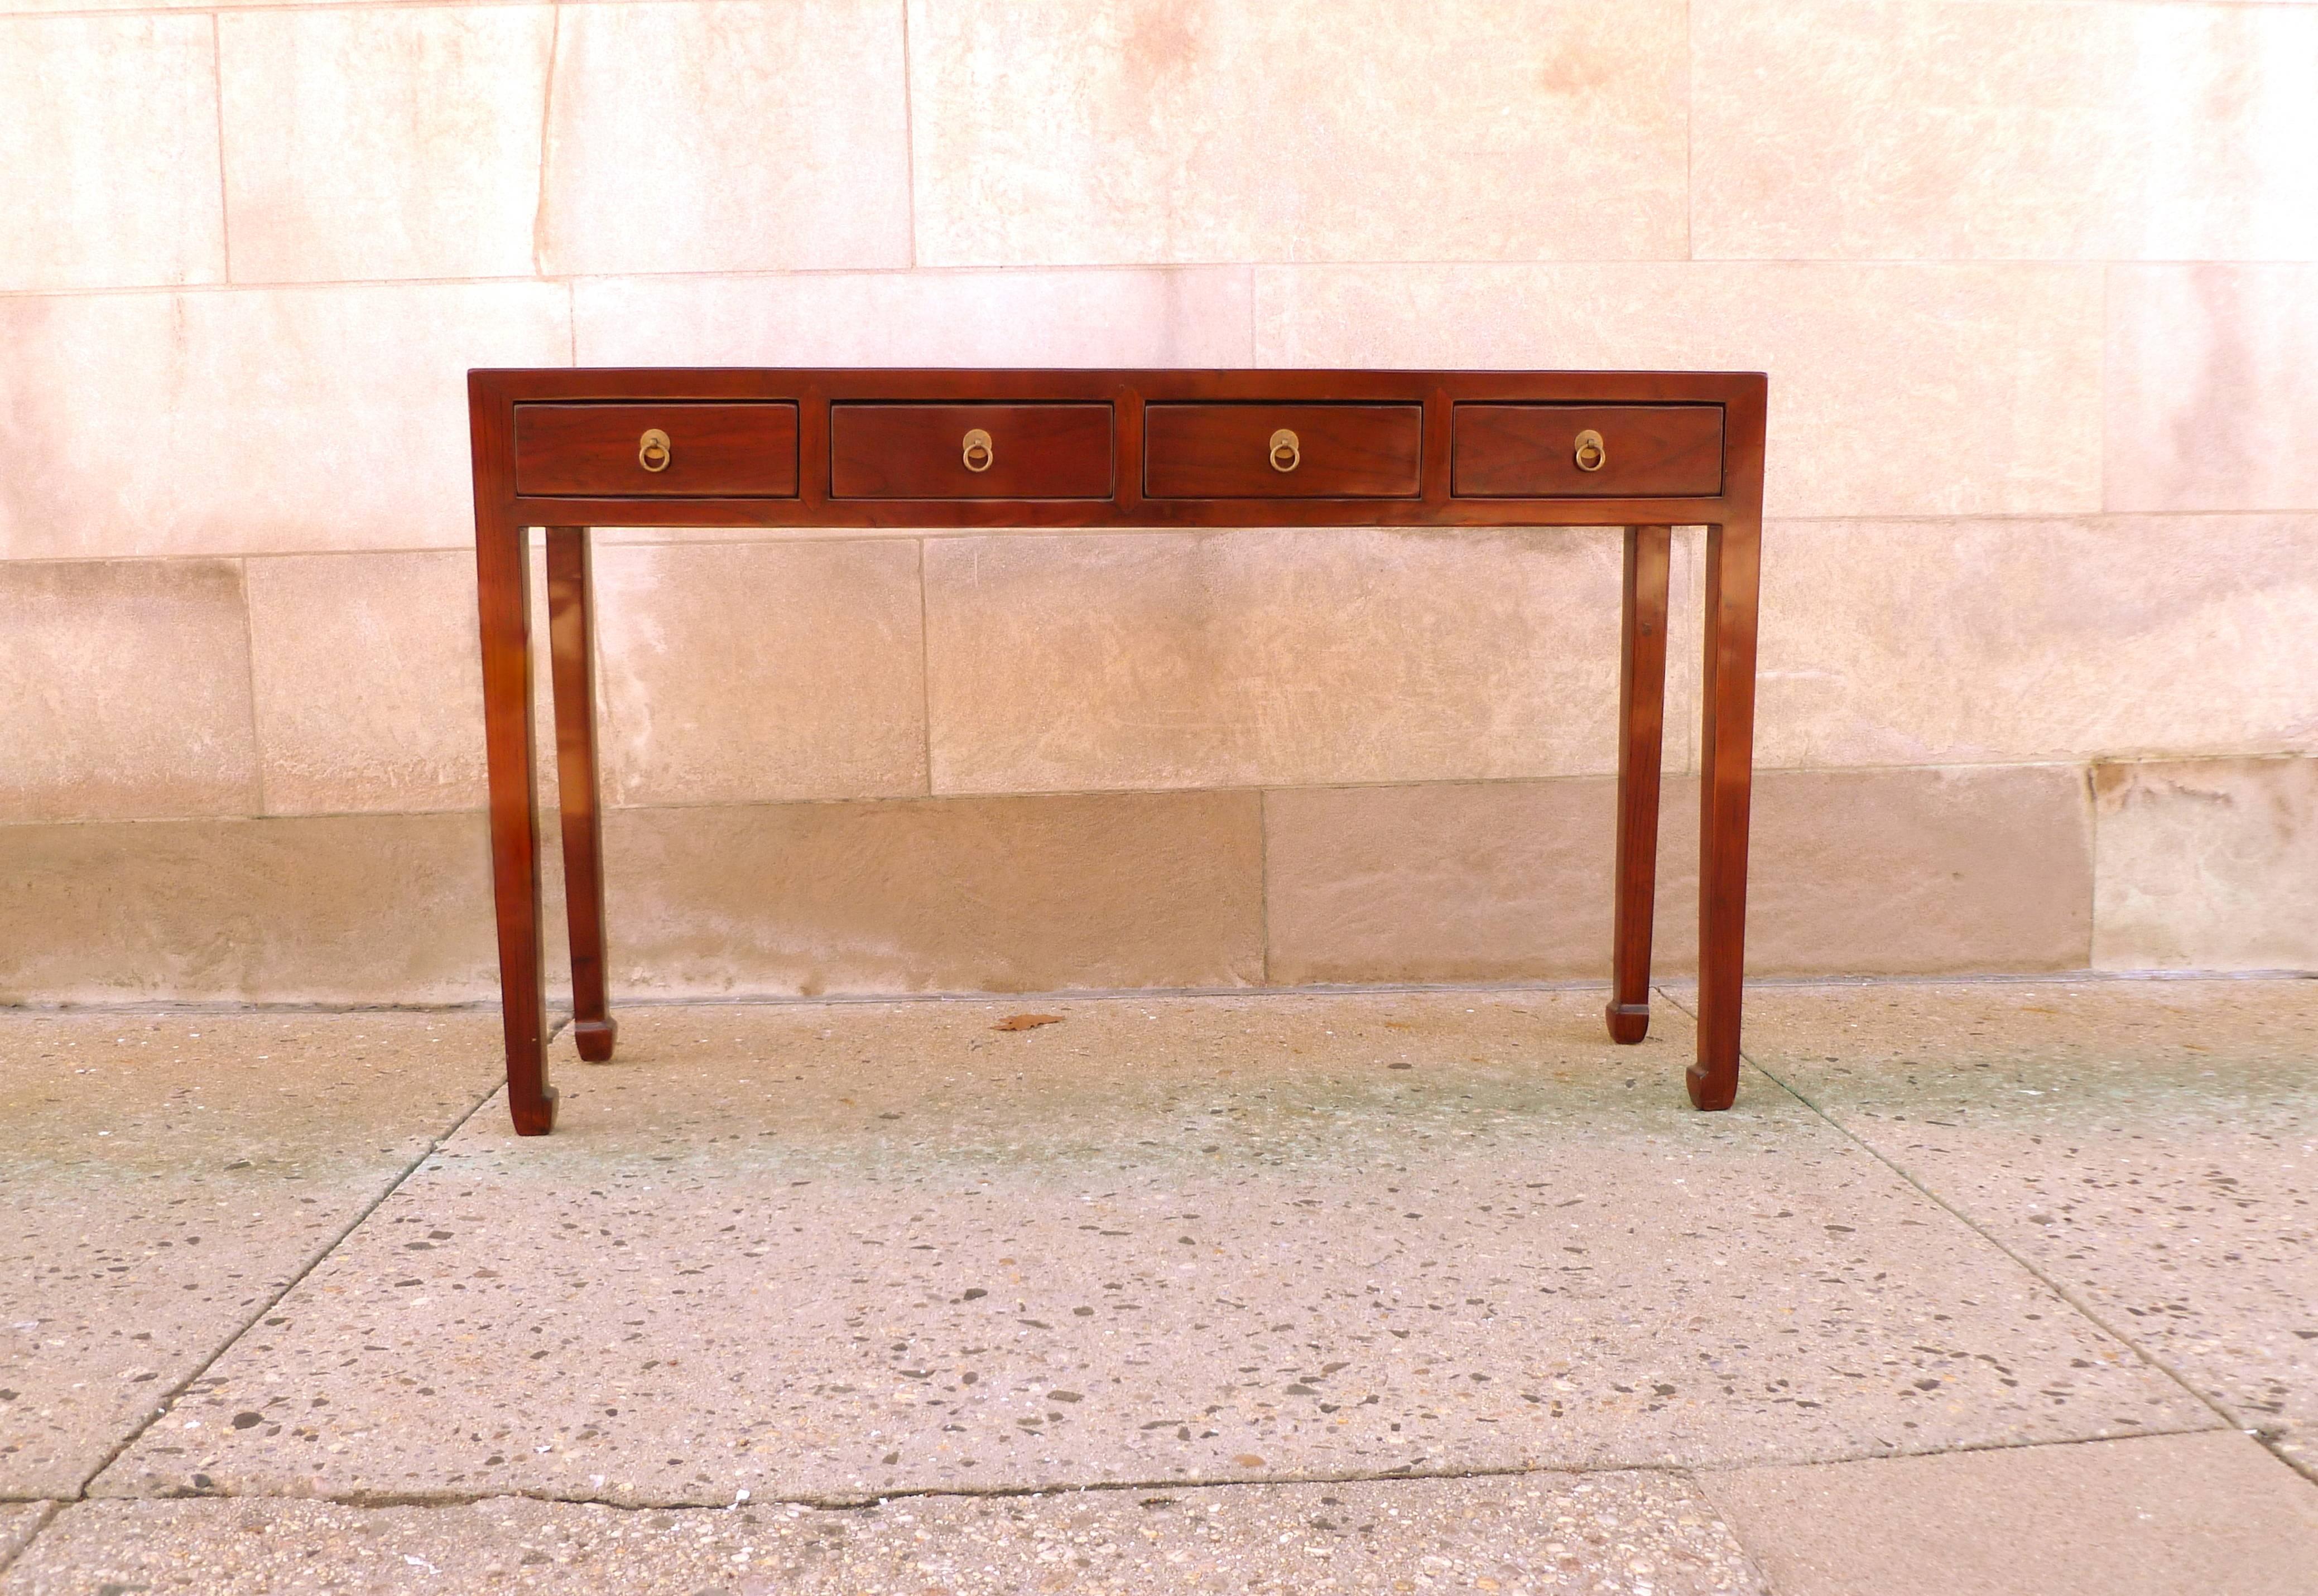 Fine Jumu console table with drawers. Simple and elegant form.